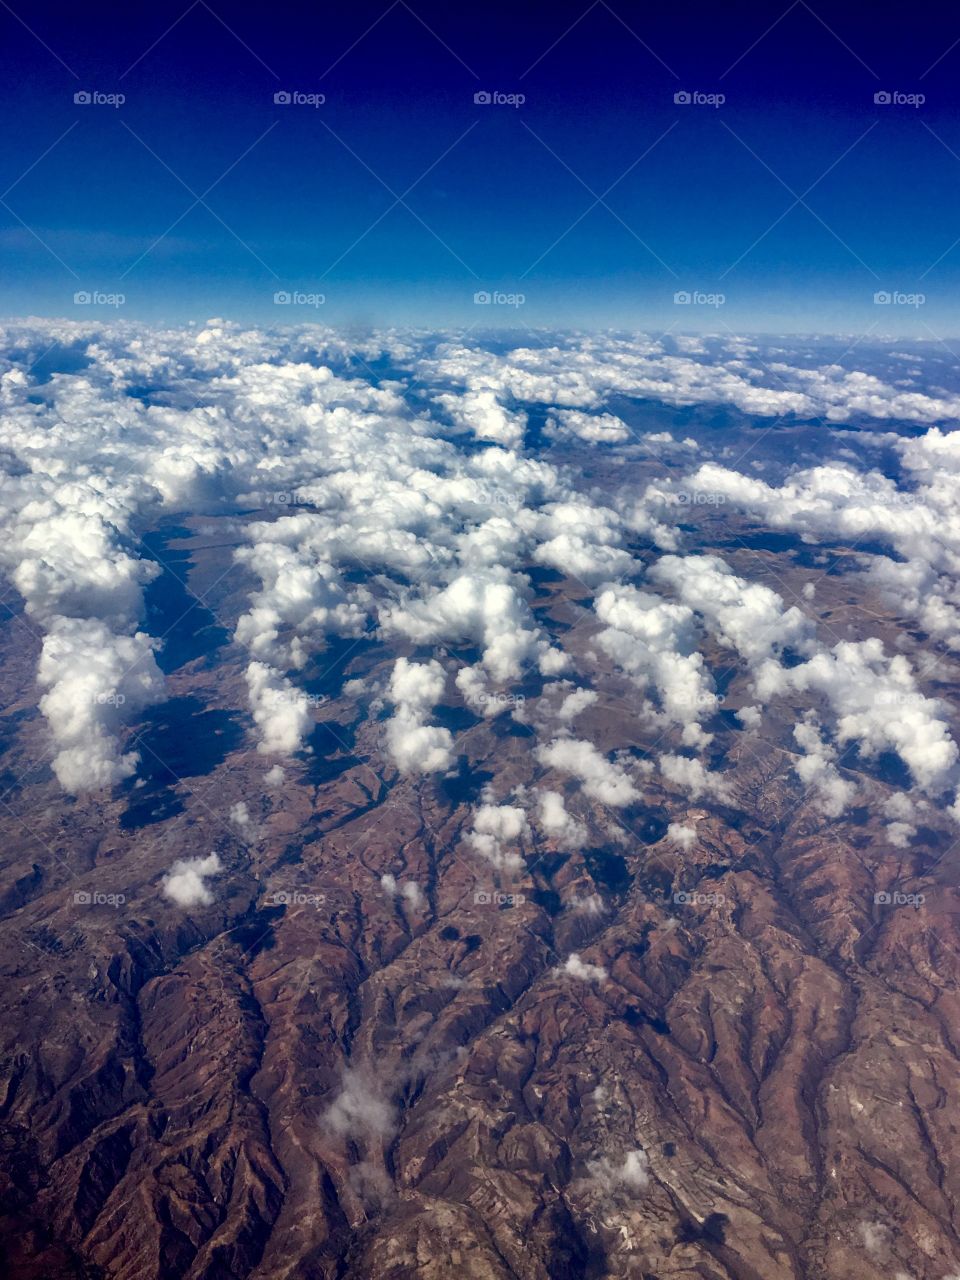 Above the Grand Canyon from an airplane.